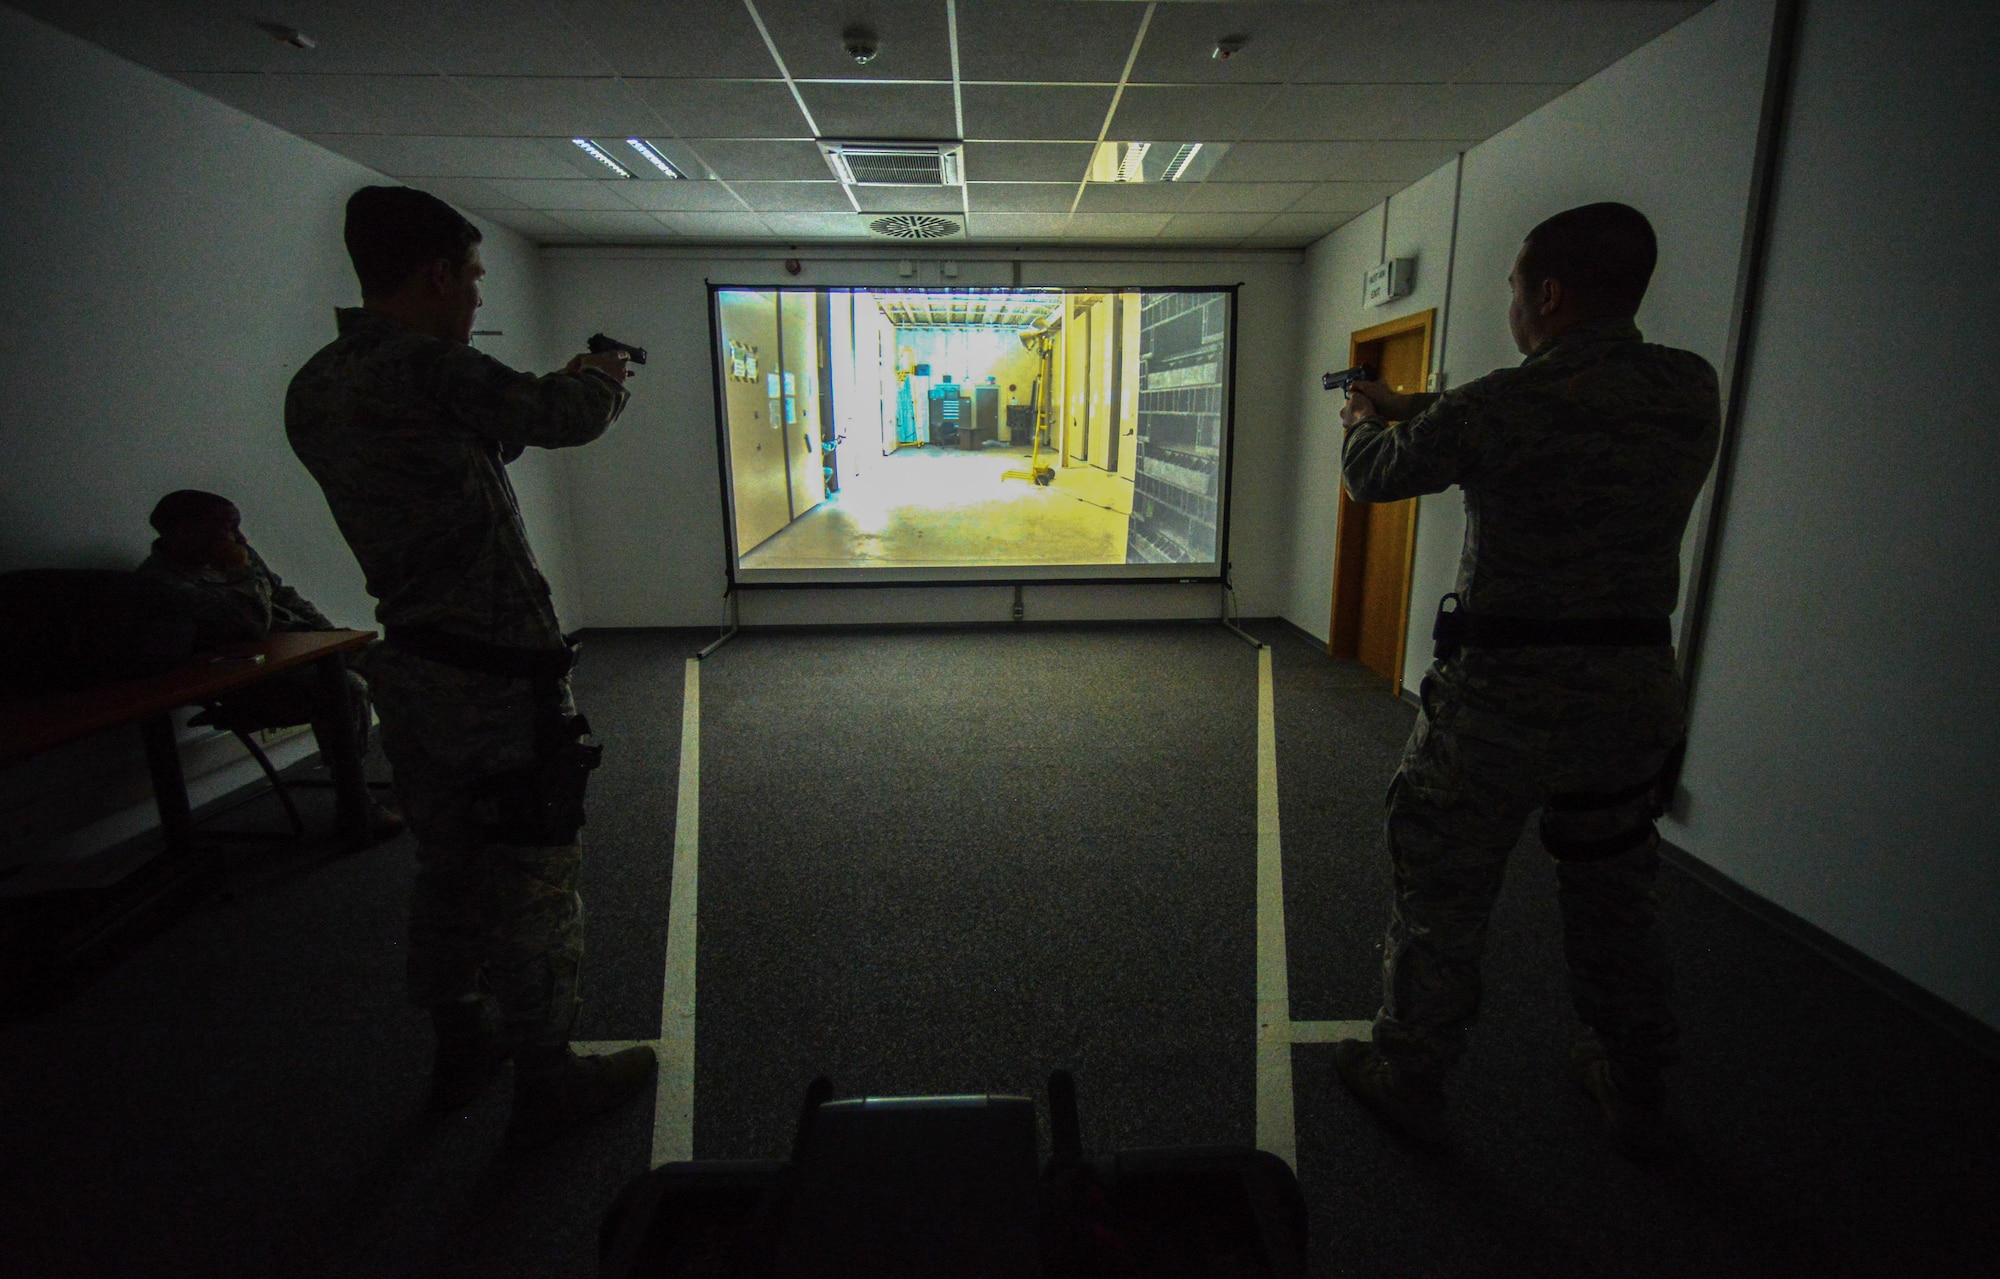 Airmen assigned to the 86th Security Forces Squadron react to a scenario during a Firearms Training System scenario March 6, 2015, at Ramstein Air Base, Germany. The training course helps give Airmen the confidence to react during real-world situations. (U.S. Air Force photo/Senior Airman Nicole Sikorski)